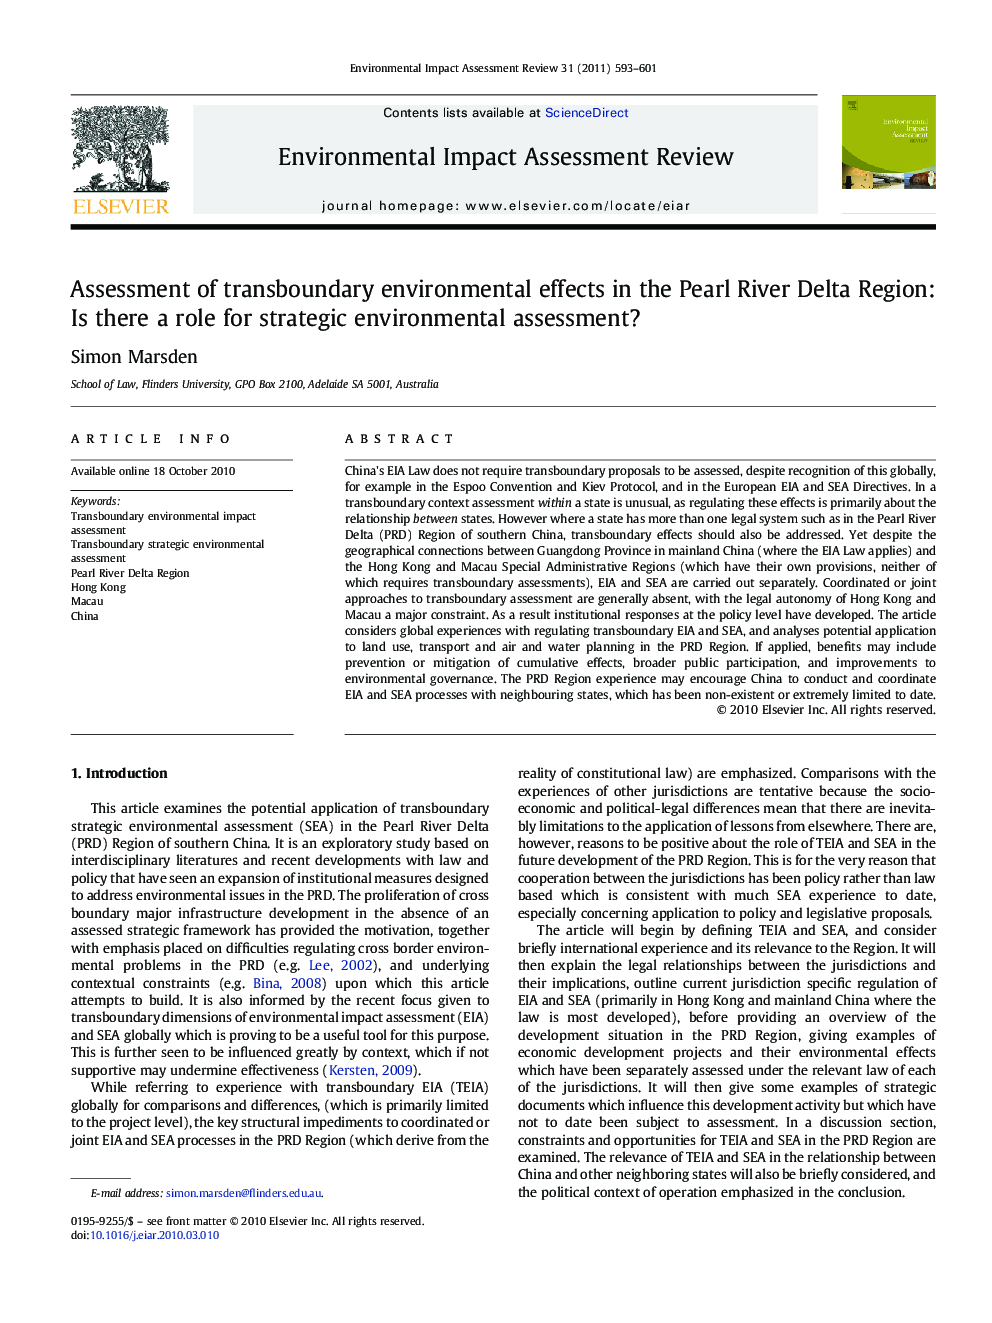 Assessment of transboundary environmental effects in the Pearl River Delta Region: Is there a role for strategic environmental assessment?